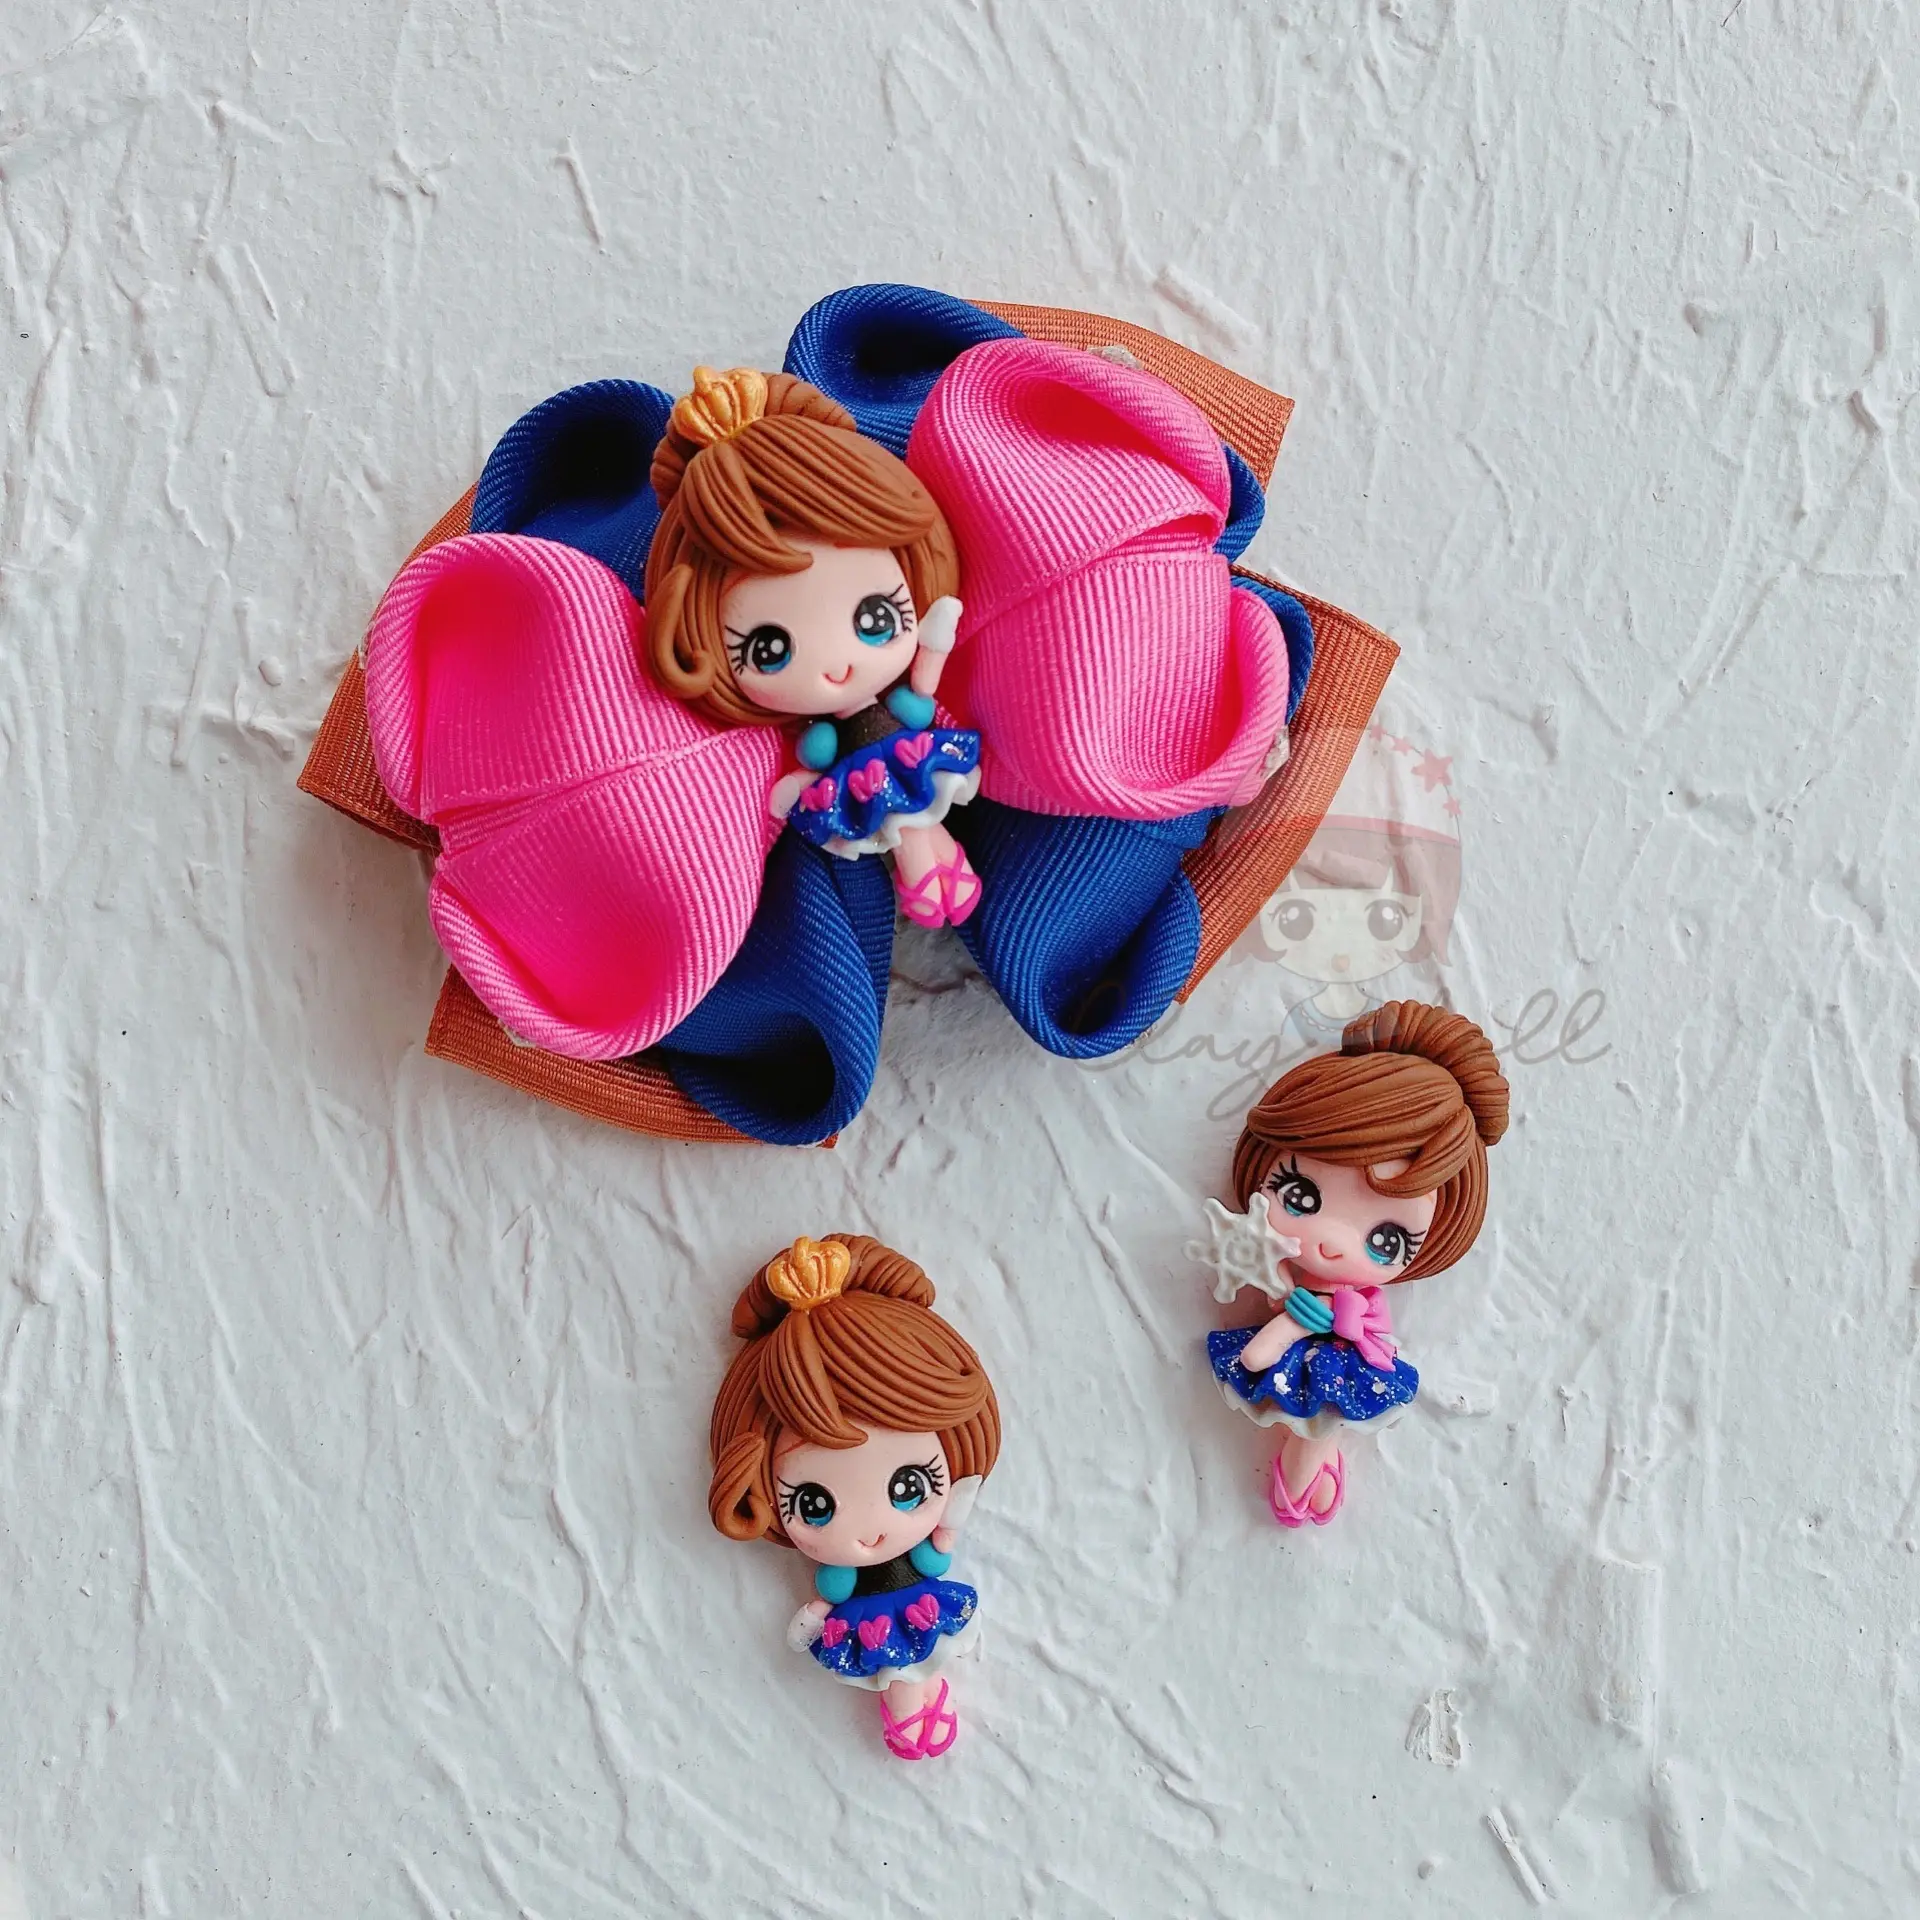 Kawaii clay dolls for bows flat mini cartoon characters clay figures for bows sweets charm diy